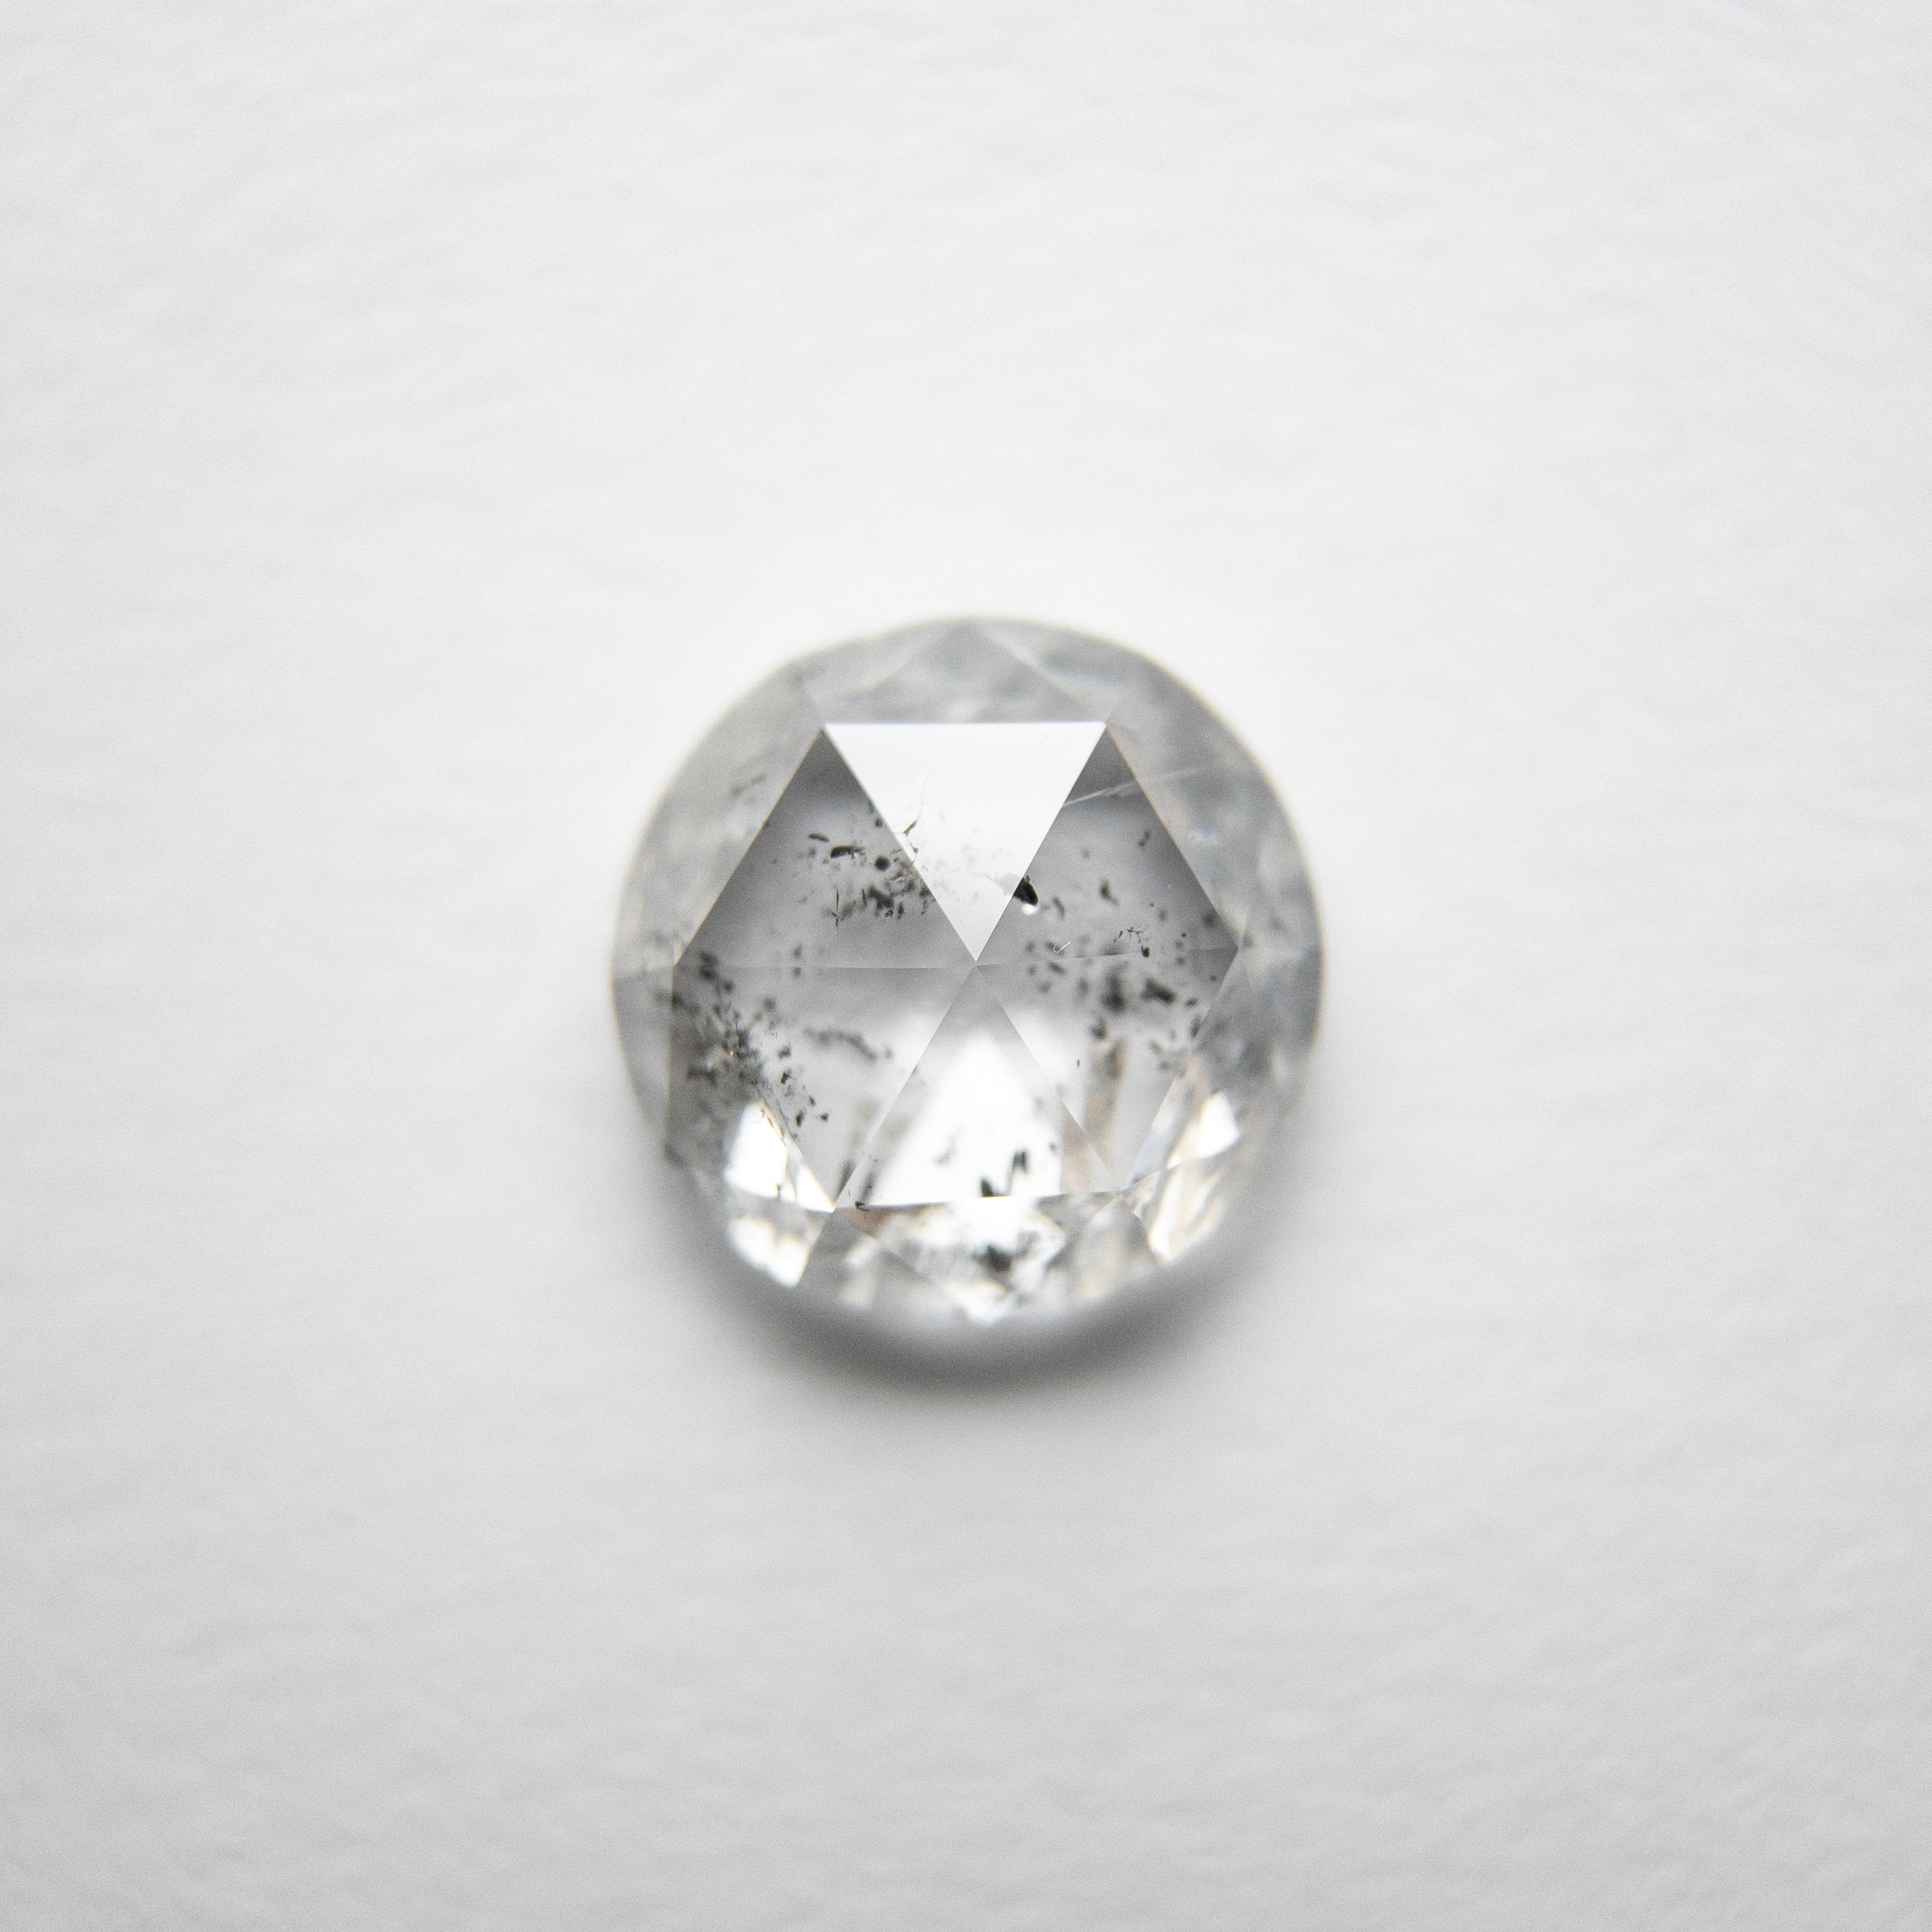 1.29ct 6.89x6.85x2.71mm Round Rosecut 18220-06 HOLD D881